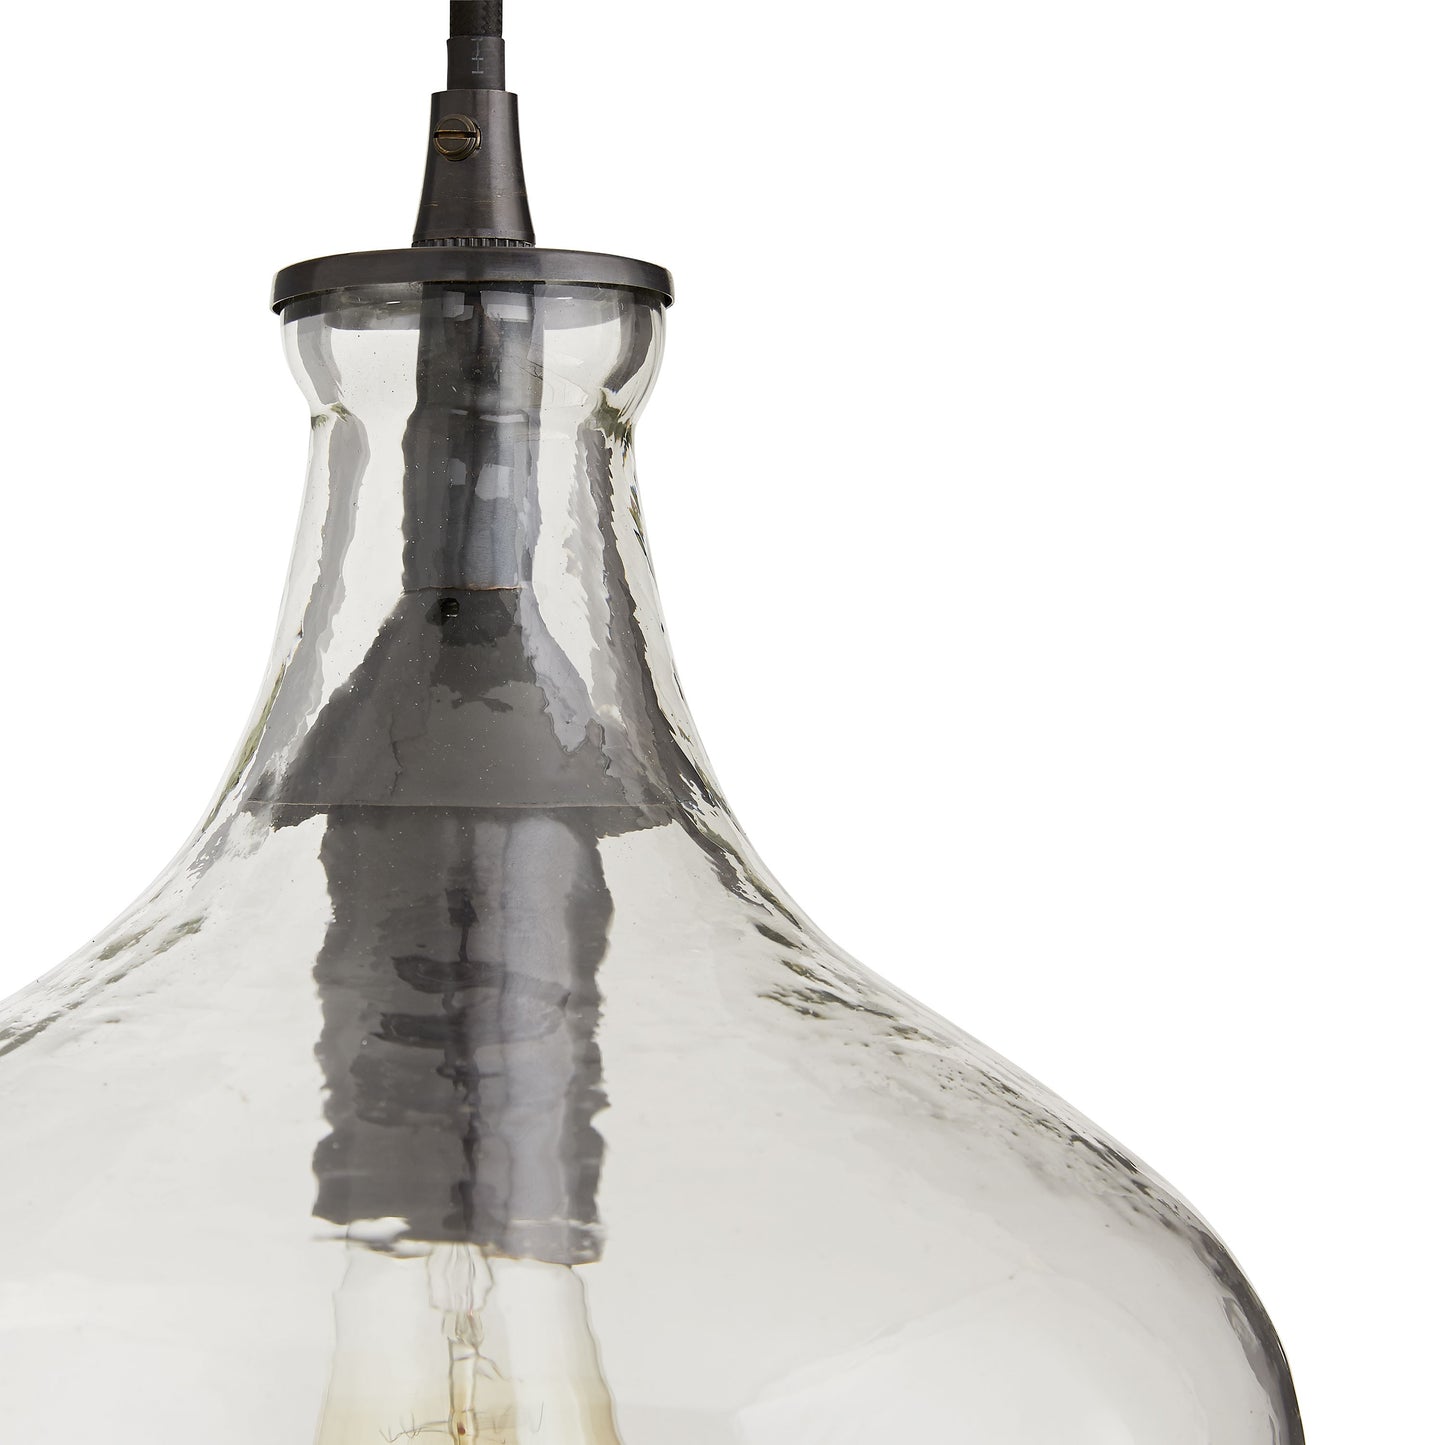 This one-light glass pendant has a black cloth cord and a simple round bronze canopy. The clear, hammered glass creates a warm glow when lit, making it a great powder room fixture. Shown with a Nostalgic thread bulb. Damp-rated, although limitedcovered outdoor conditions may affect finish. hardware